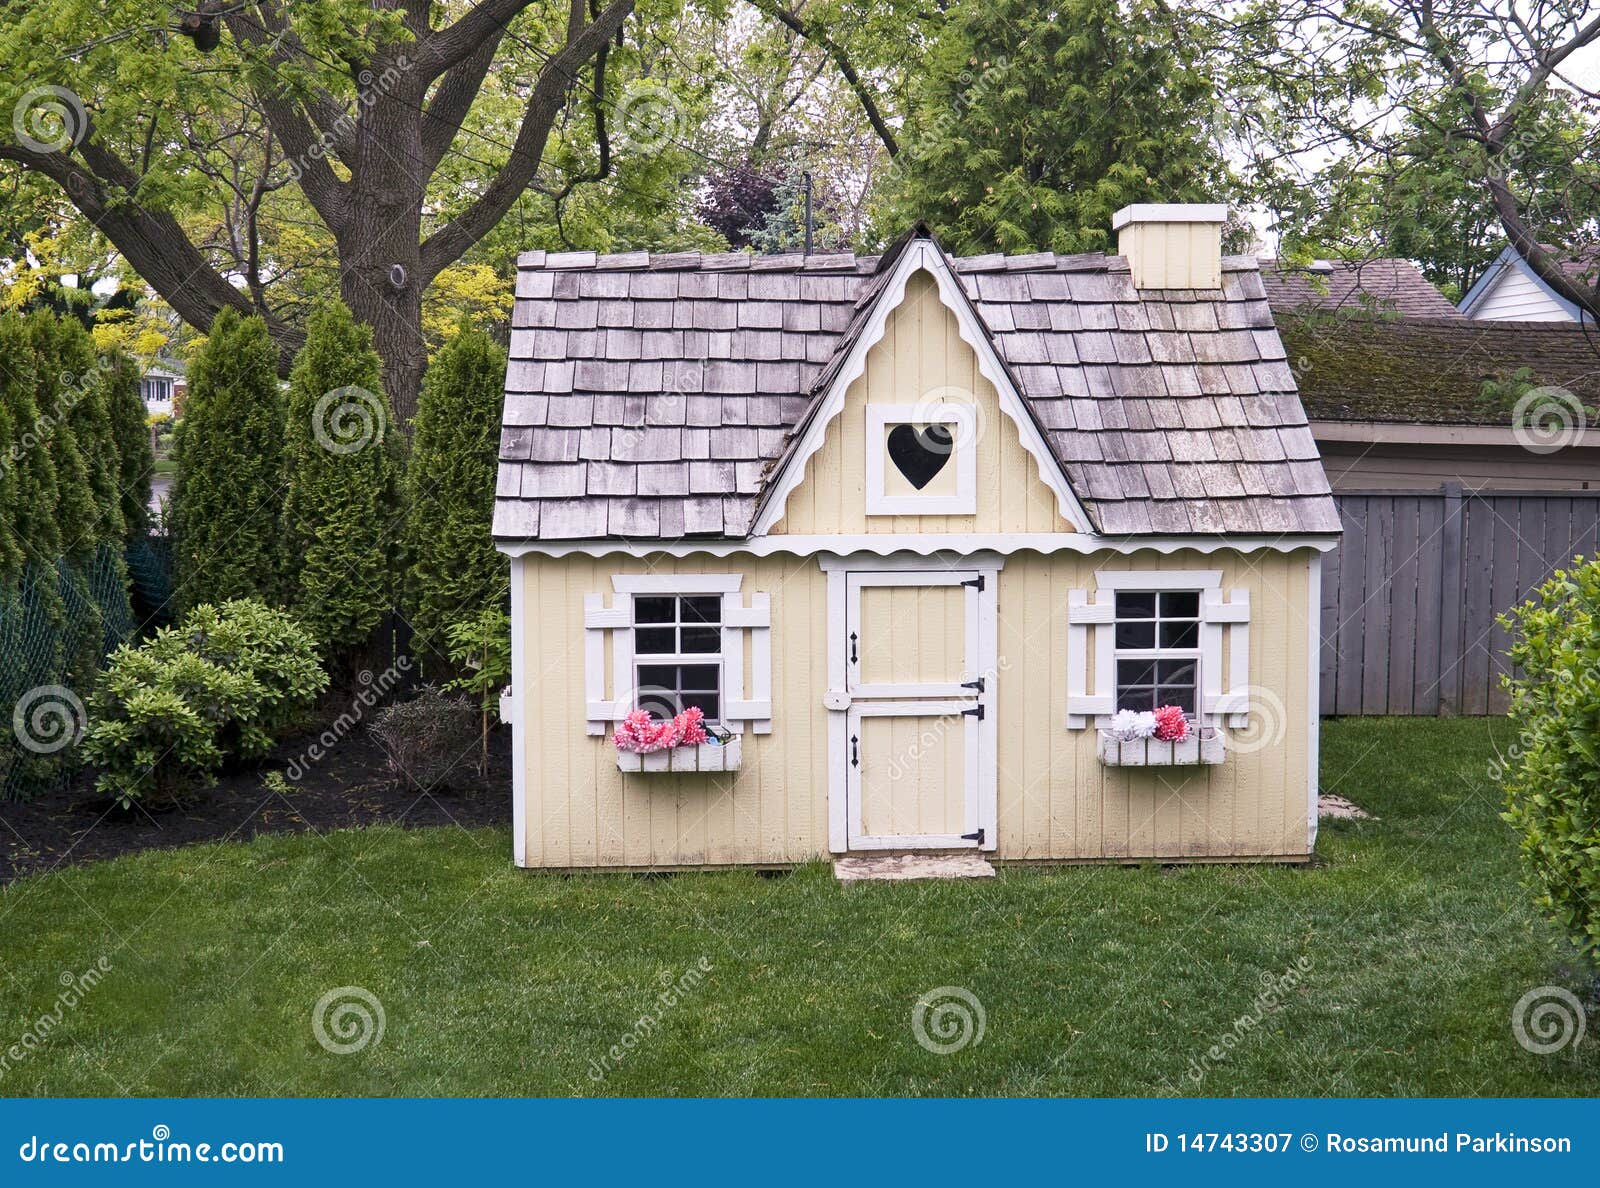 Playhouse In The Backyard Stock Image Image Of Leisure 14743307